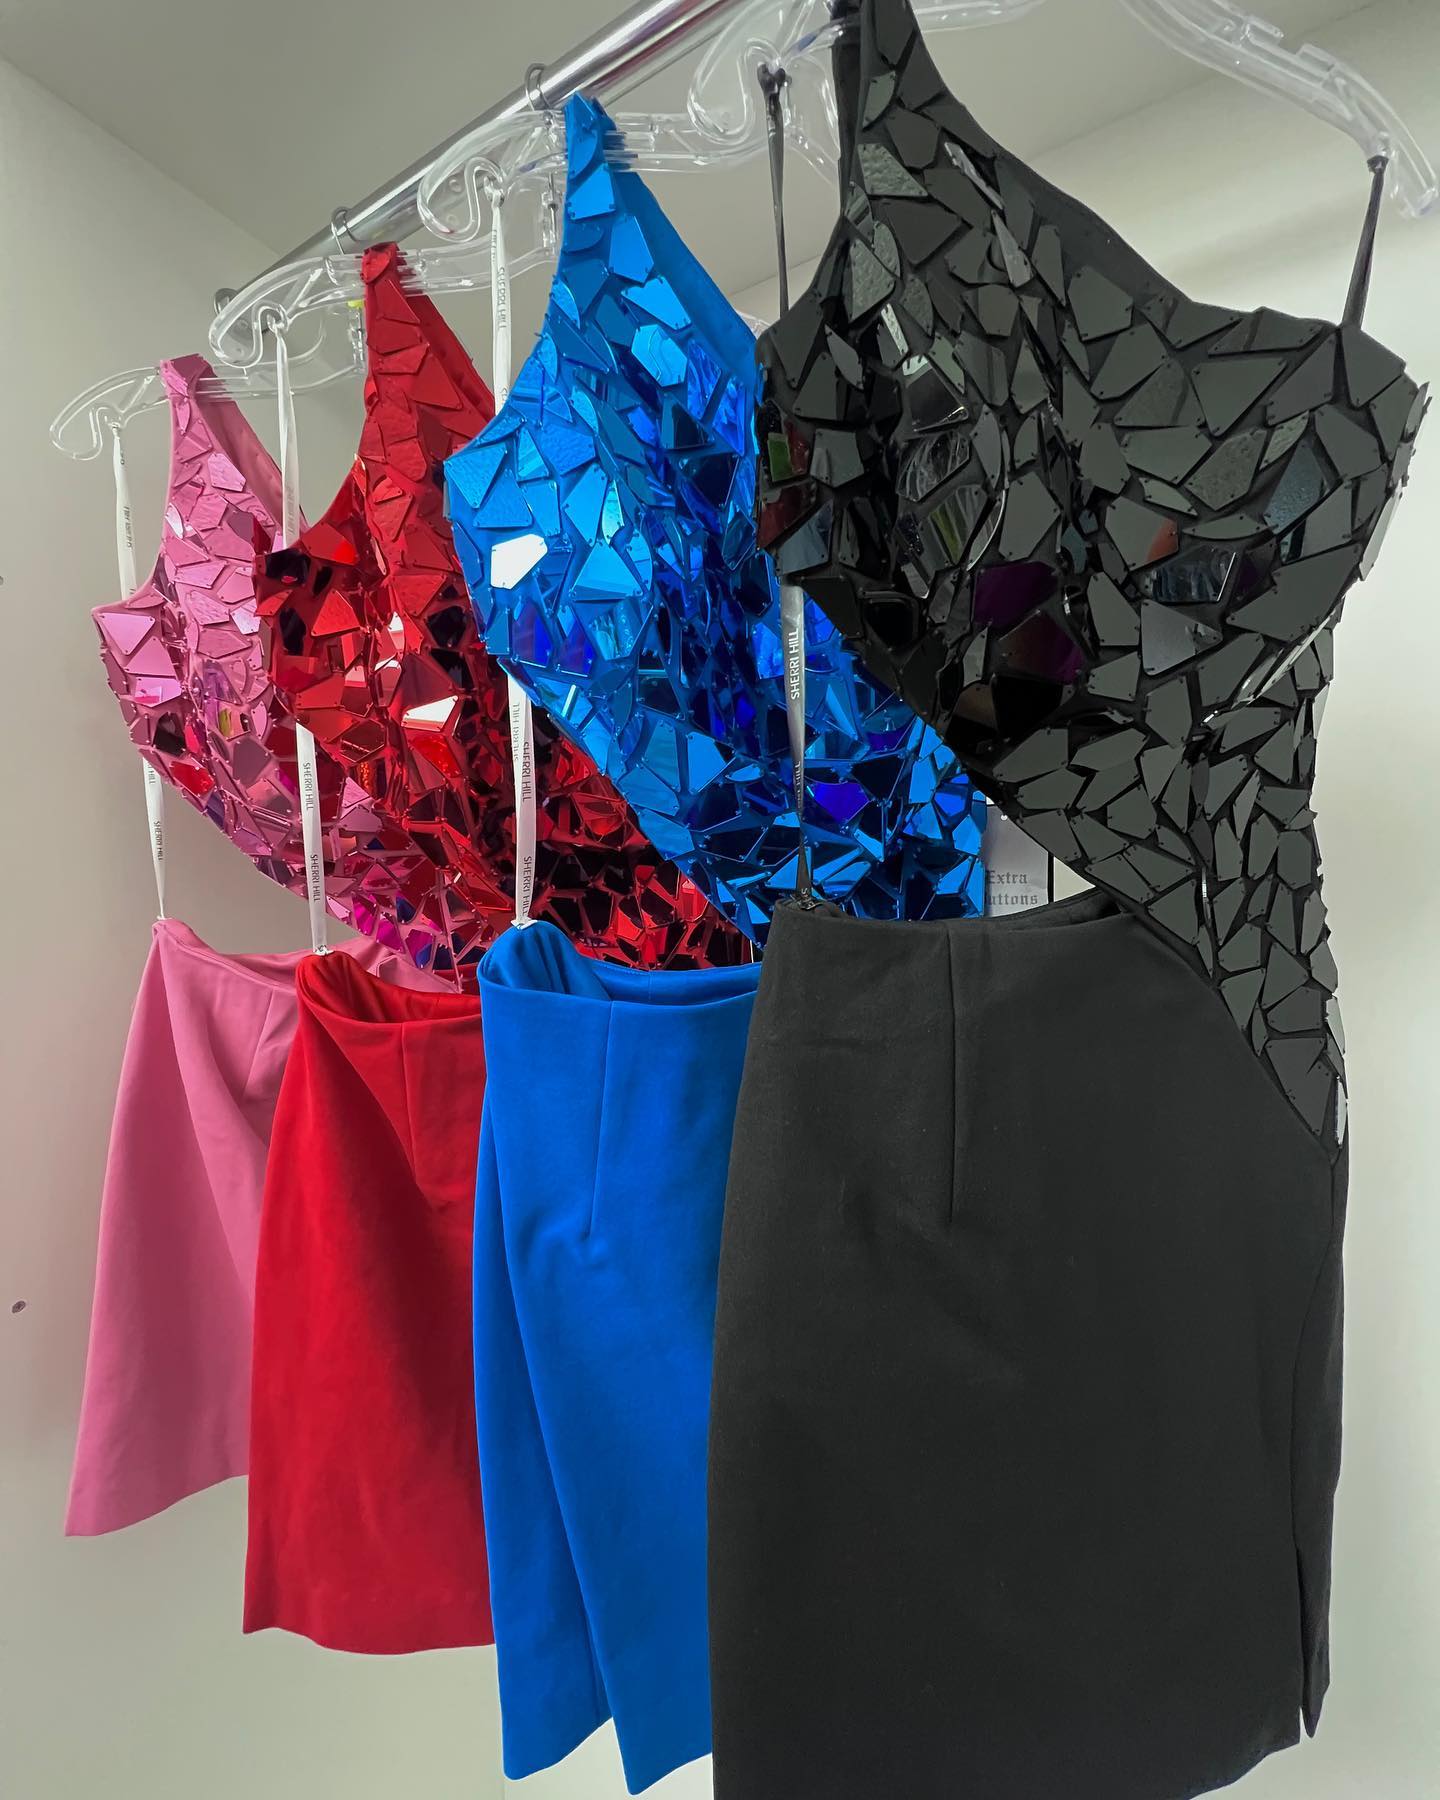 Specchio Hoco Dress 2023 Glass Cut-Out Lady Evento formale Cocktail Party Homecoming Pageant Short Prom Dance Gown Black Peacocks Pink Red Guaina One-Shoulder 2k23 Split